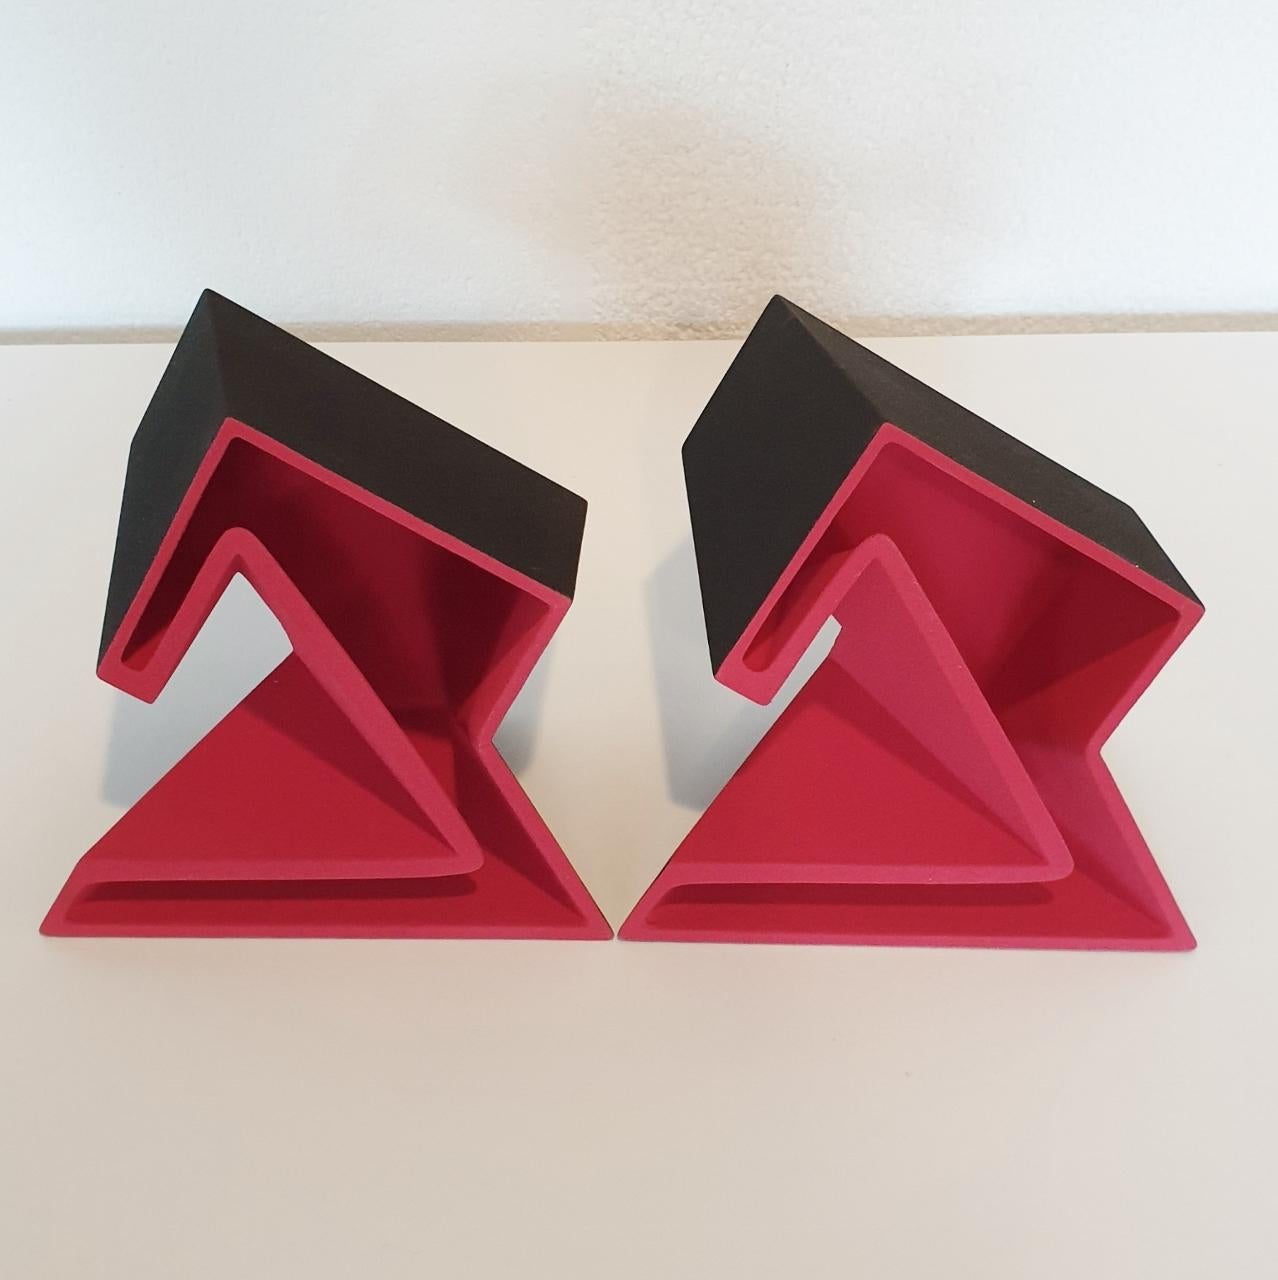 SC1503 red - contemporary modern abstract geometric ceramic object sculpture - Contemporary Sculpture by Let de Kok